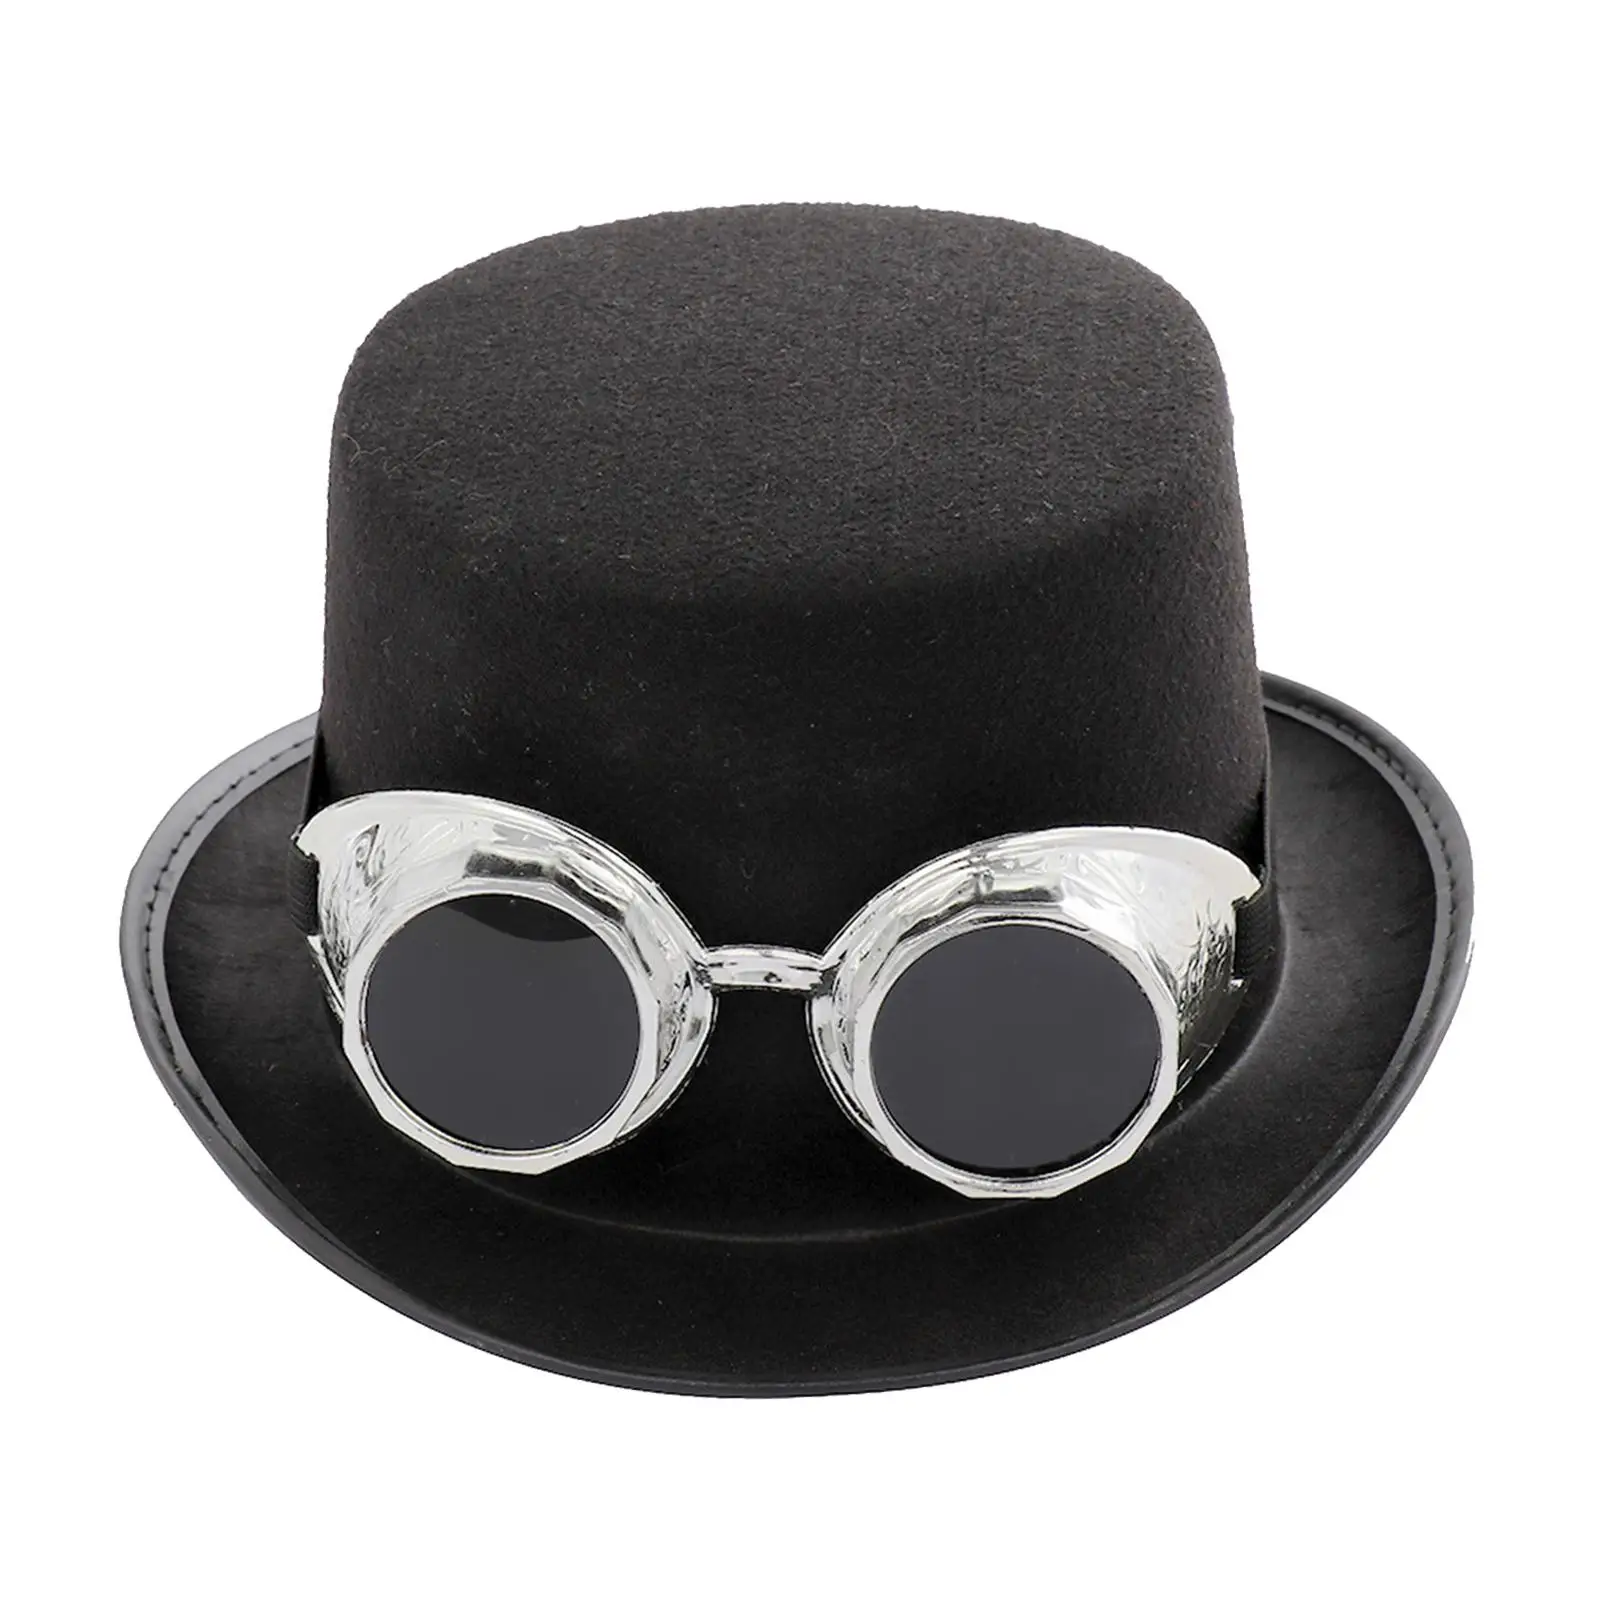 Goth Steampunk Top Hat with Goggles Cosplay Costume Hat Head Wear Gift